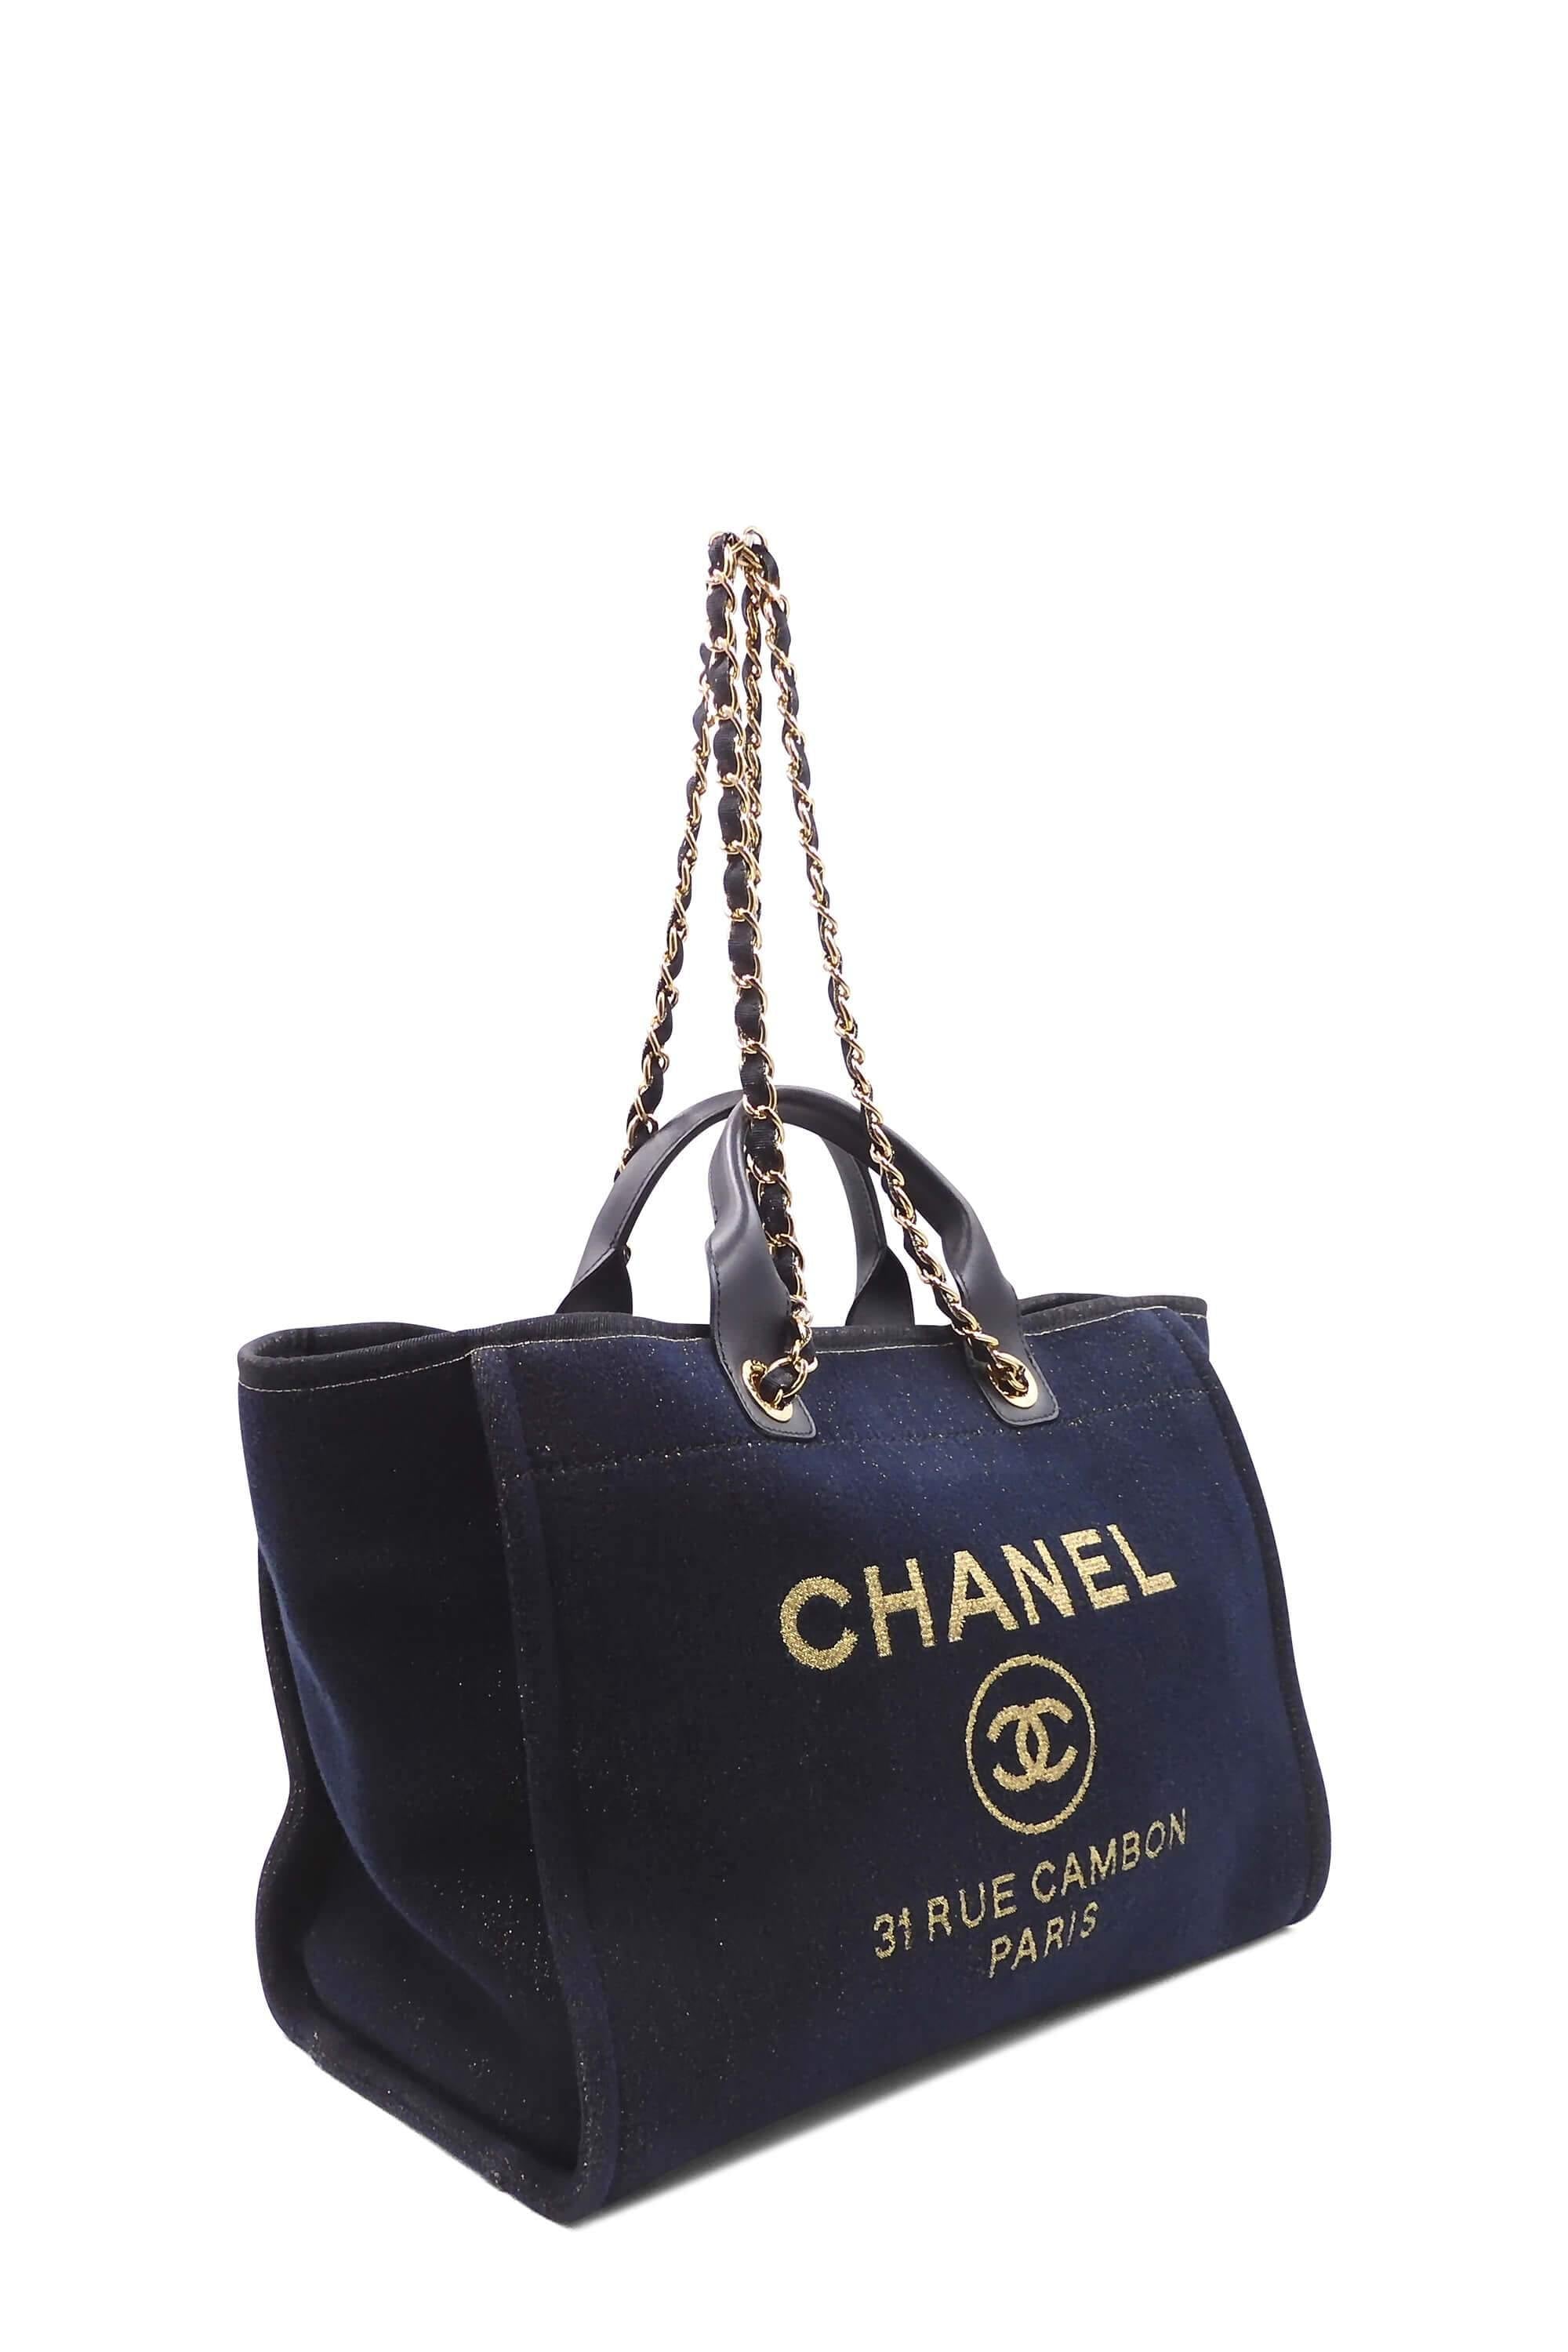 SOLD Chanel Deauville Denim Blue Silver Chain 2 Way Shoulder Hand Held Tote  Large Bag - My Dreamz Closet